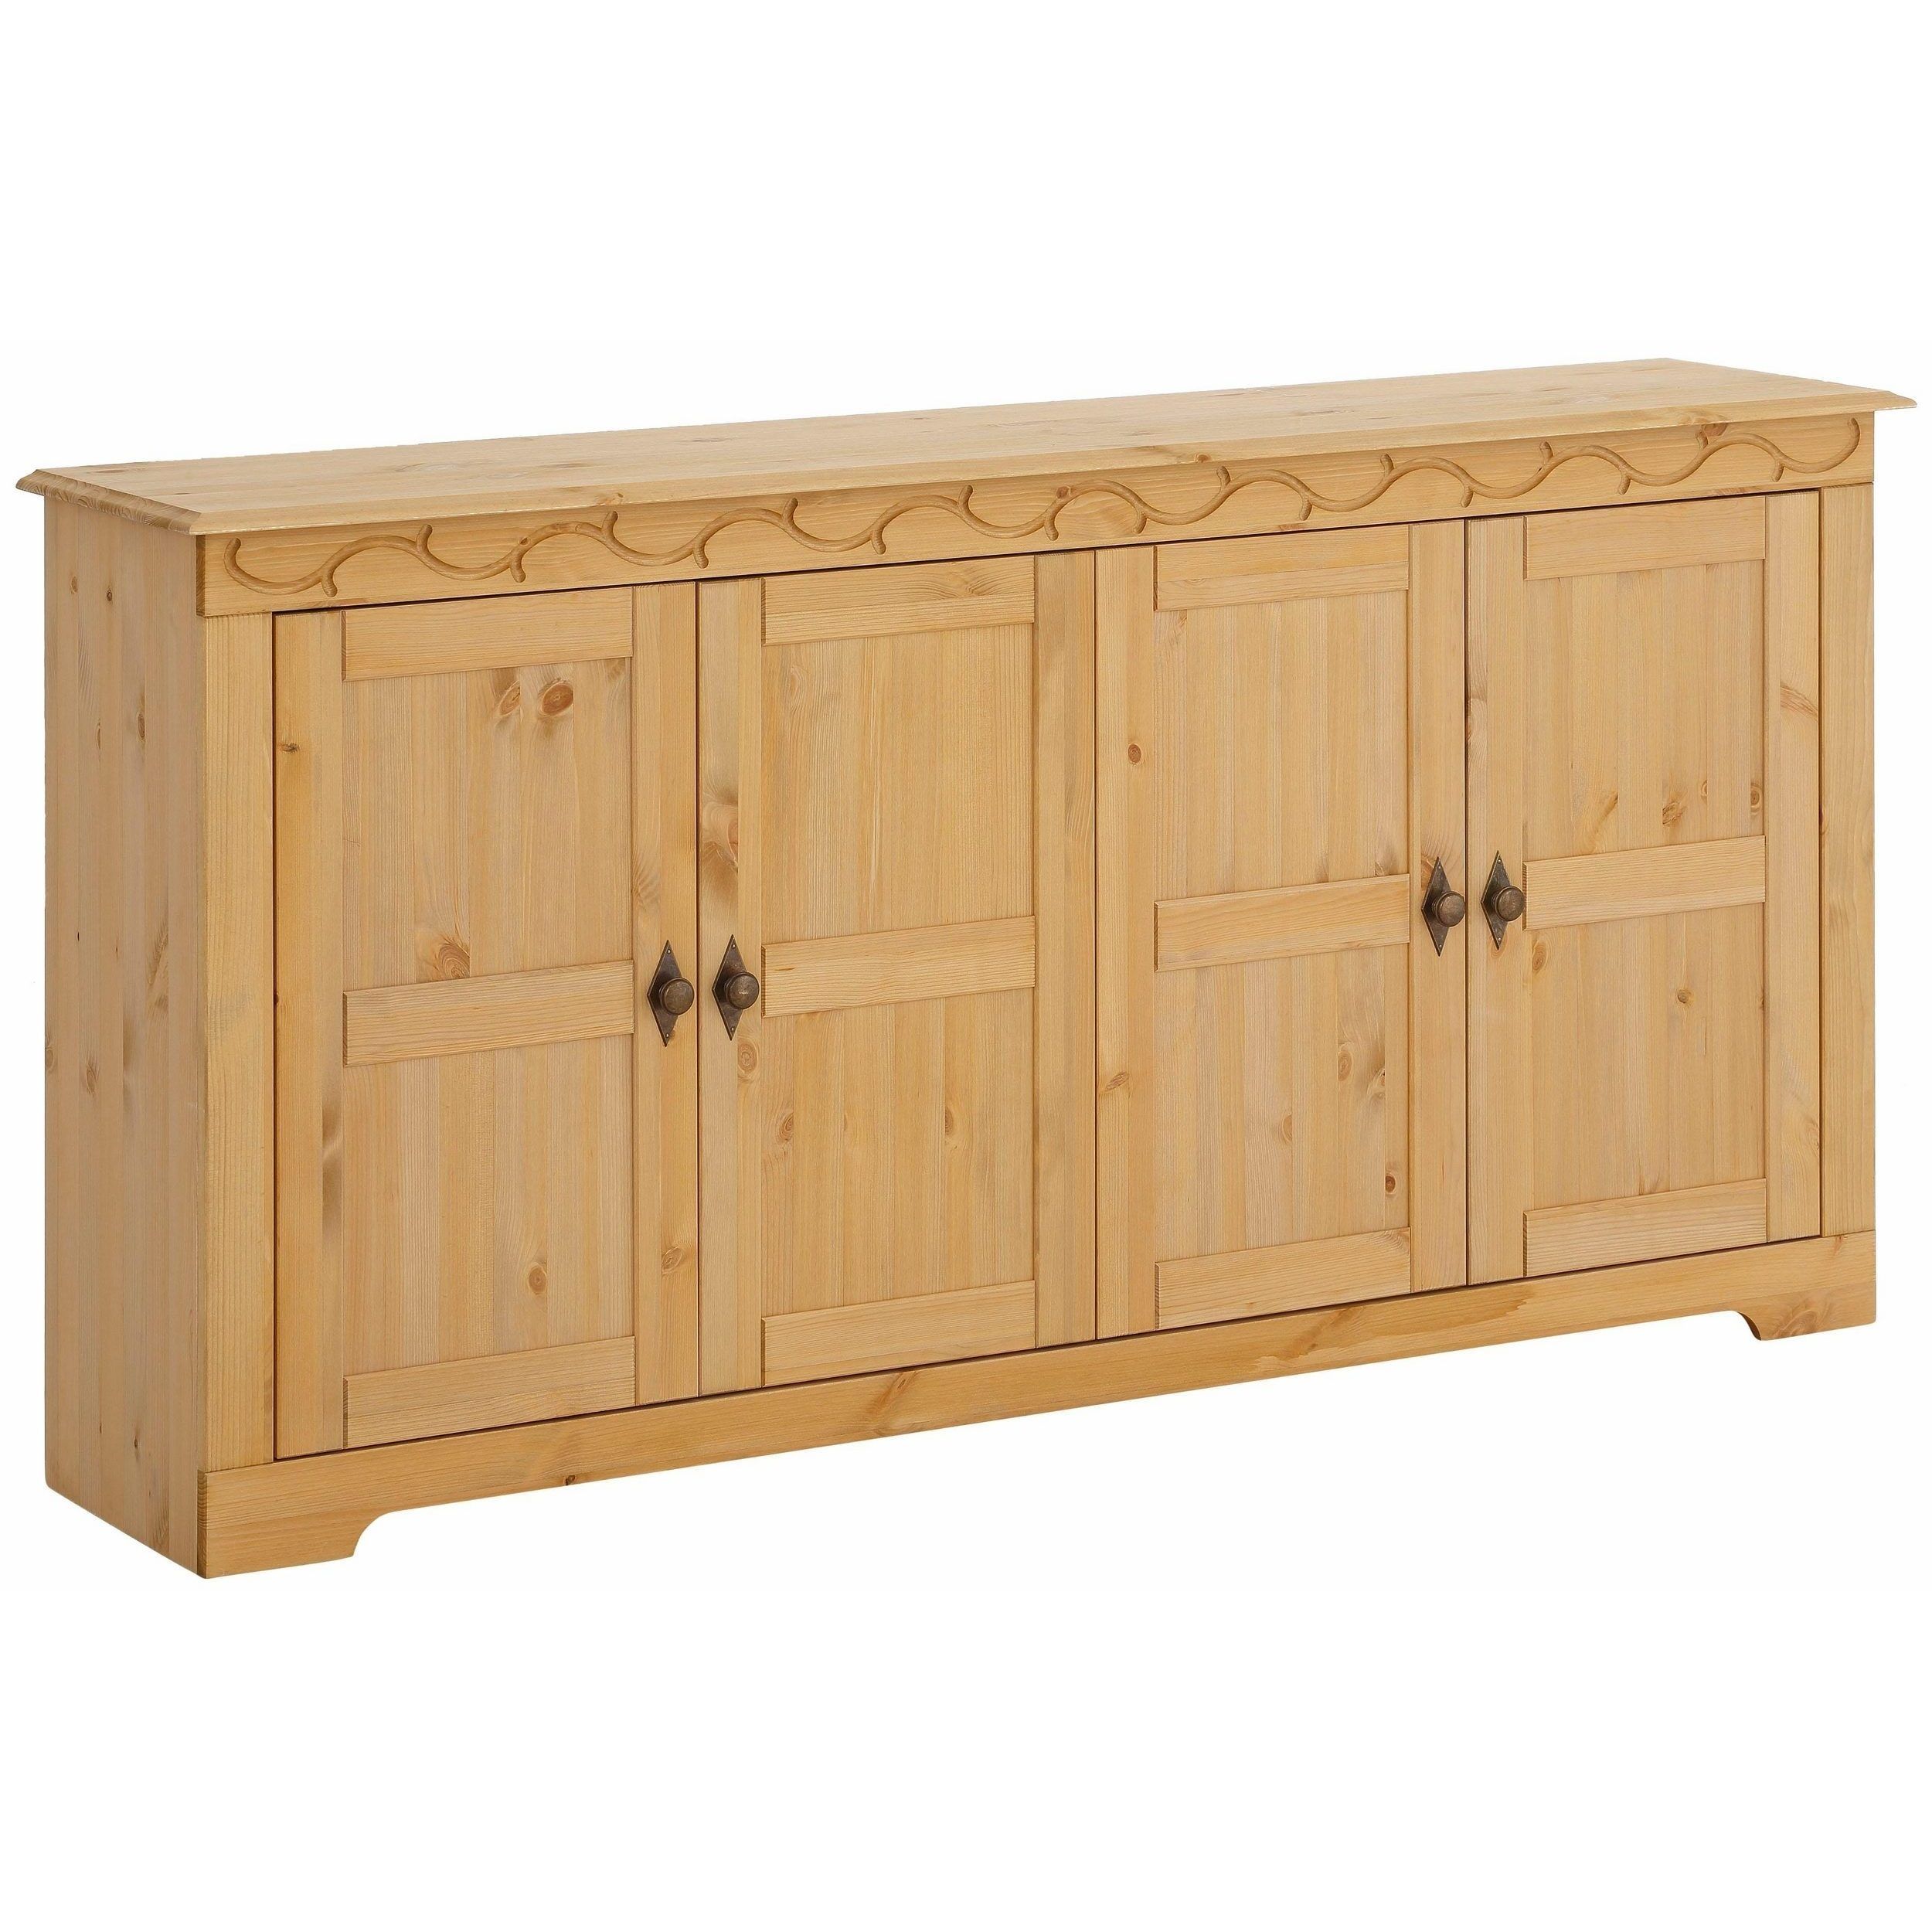 Shop Lando 4 Door Sideboard, Solid Pine, Natural – Free Shipping Throughout Natural South Pine Sideboards (View 2 of 30)